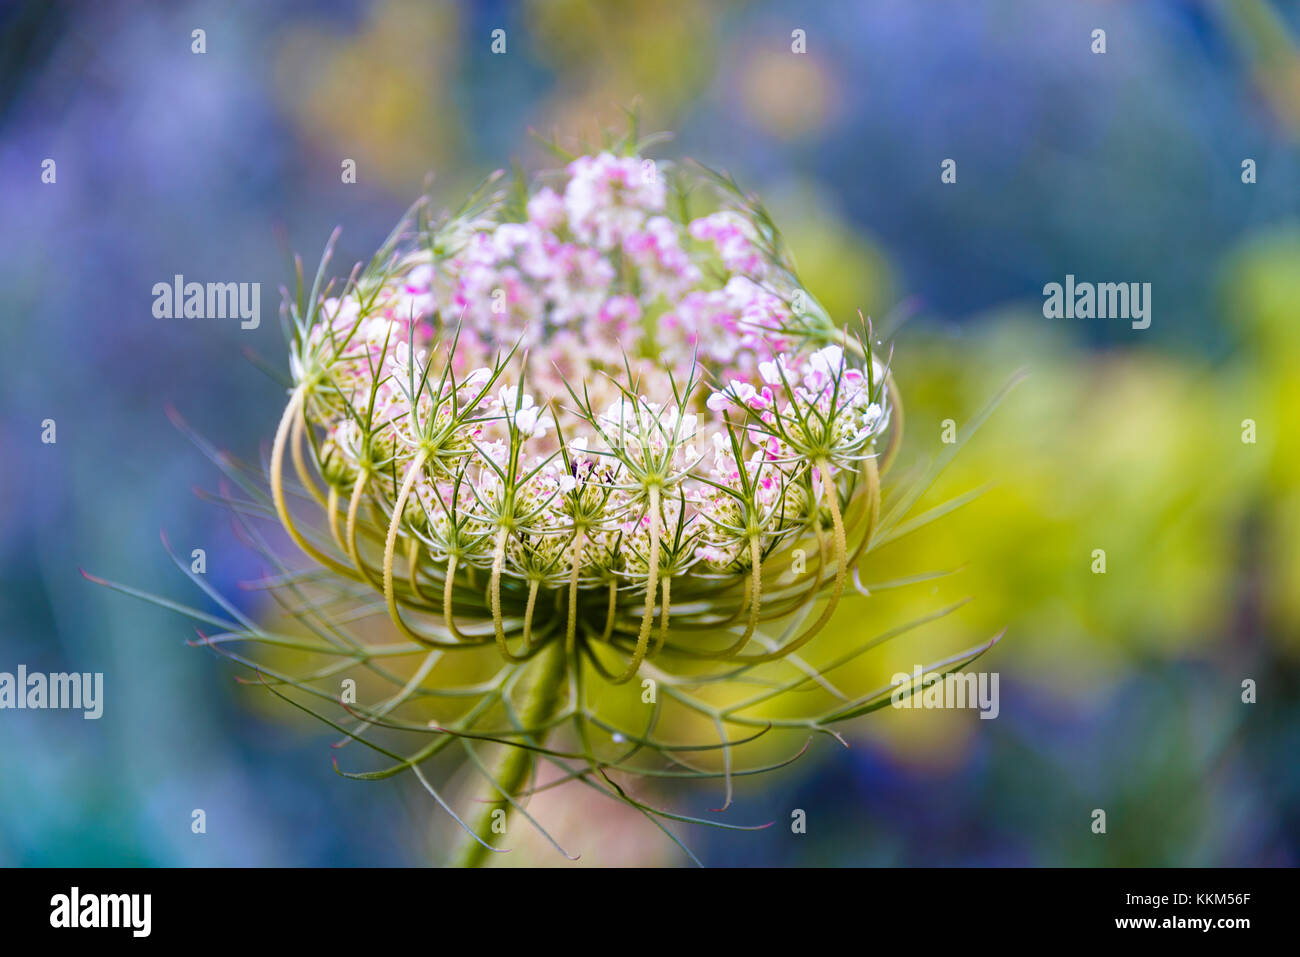 Simple wild flower in bloom, background isolated. Stock Photo